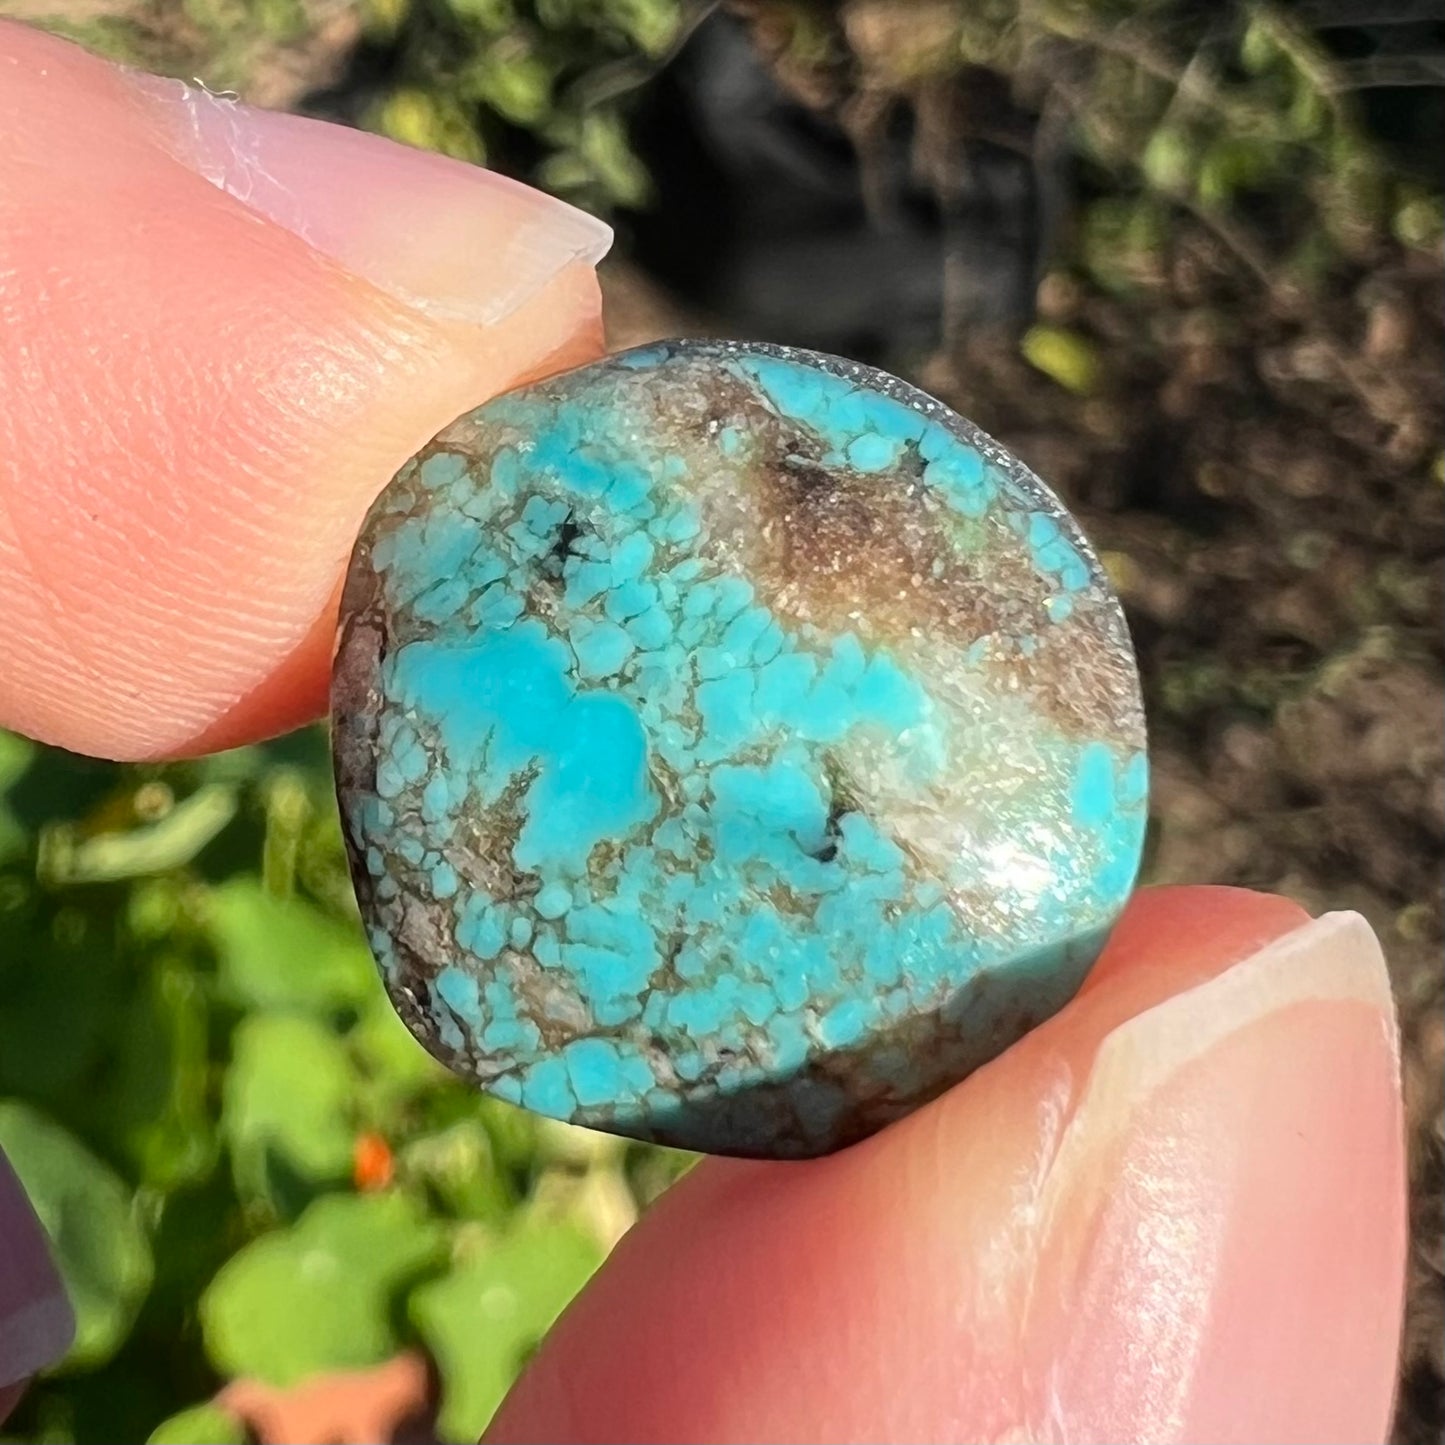 A round cabochon cut Tyrone turquoise stone from New Mexico.  The stone is blue with brown, gray, and black matrix.